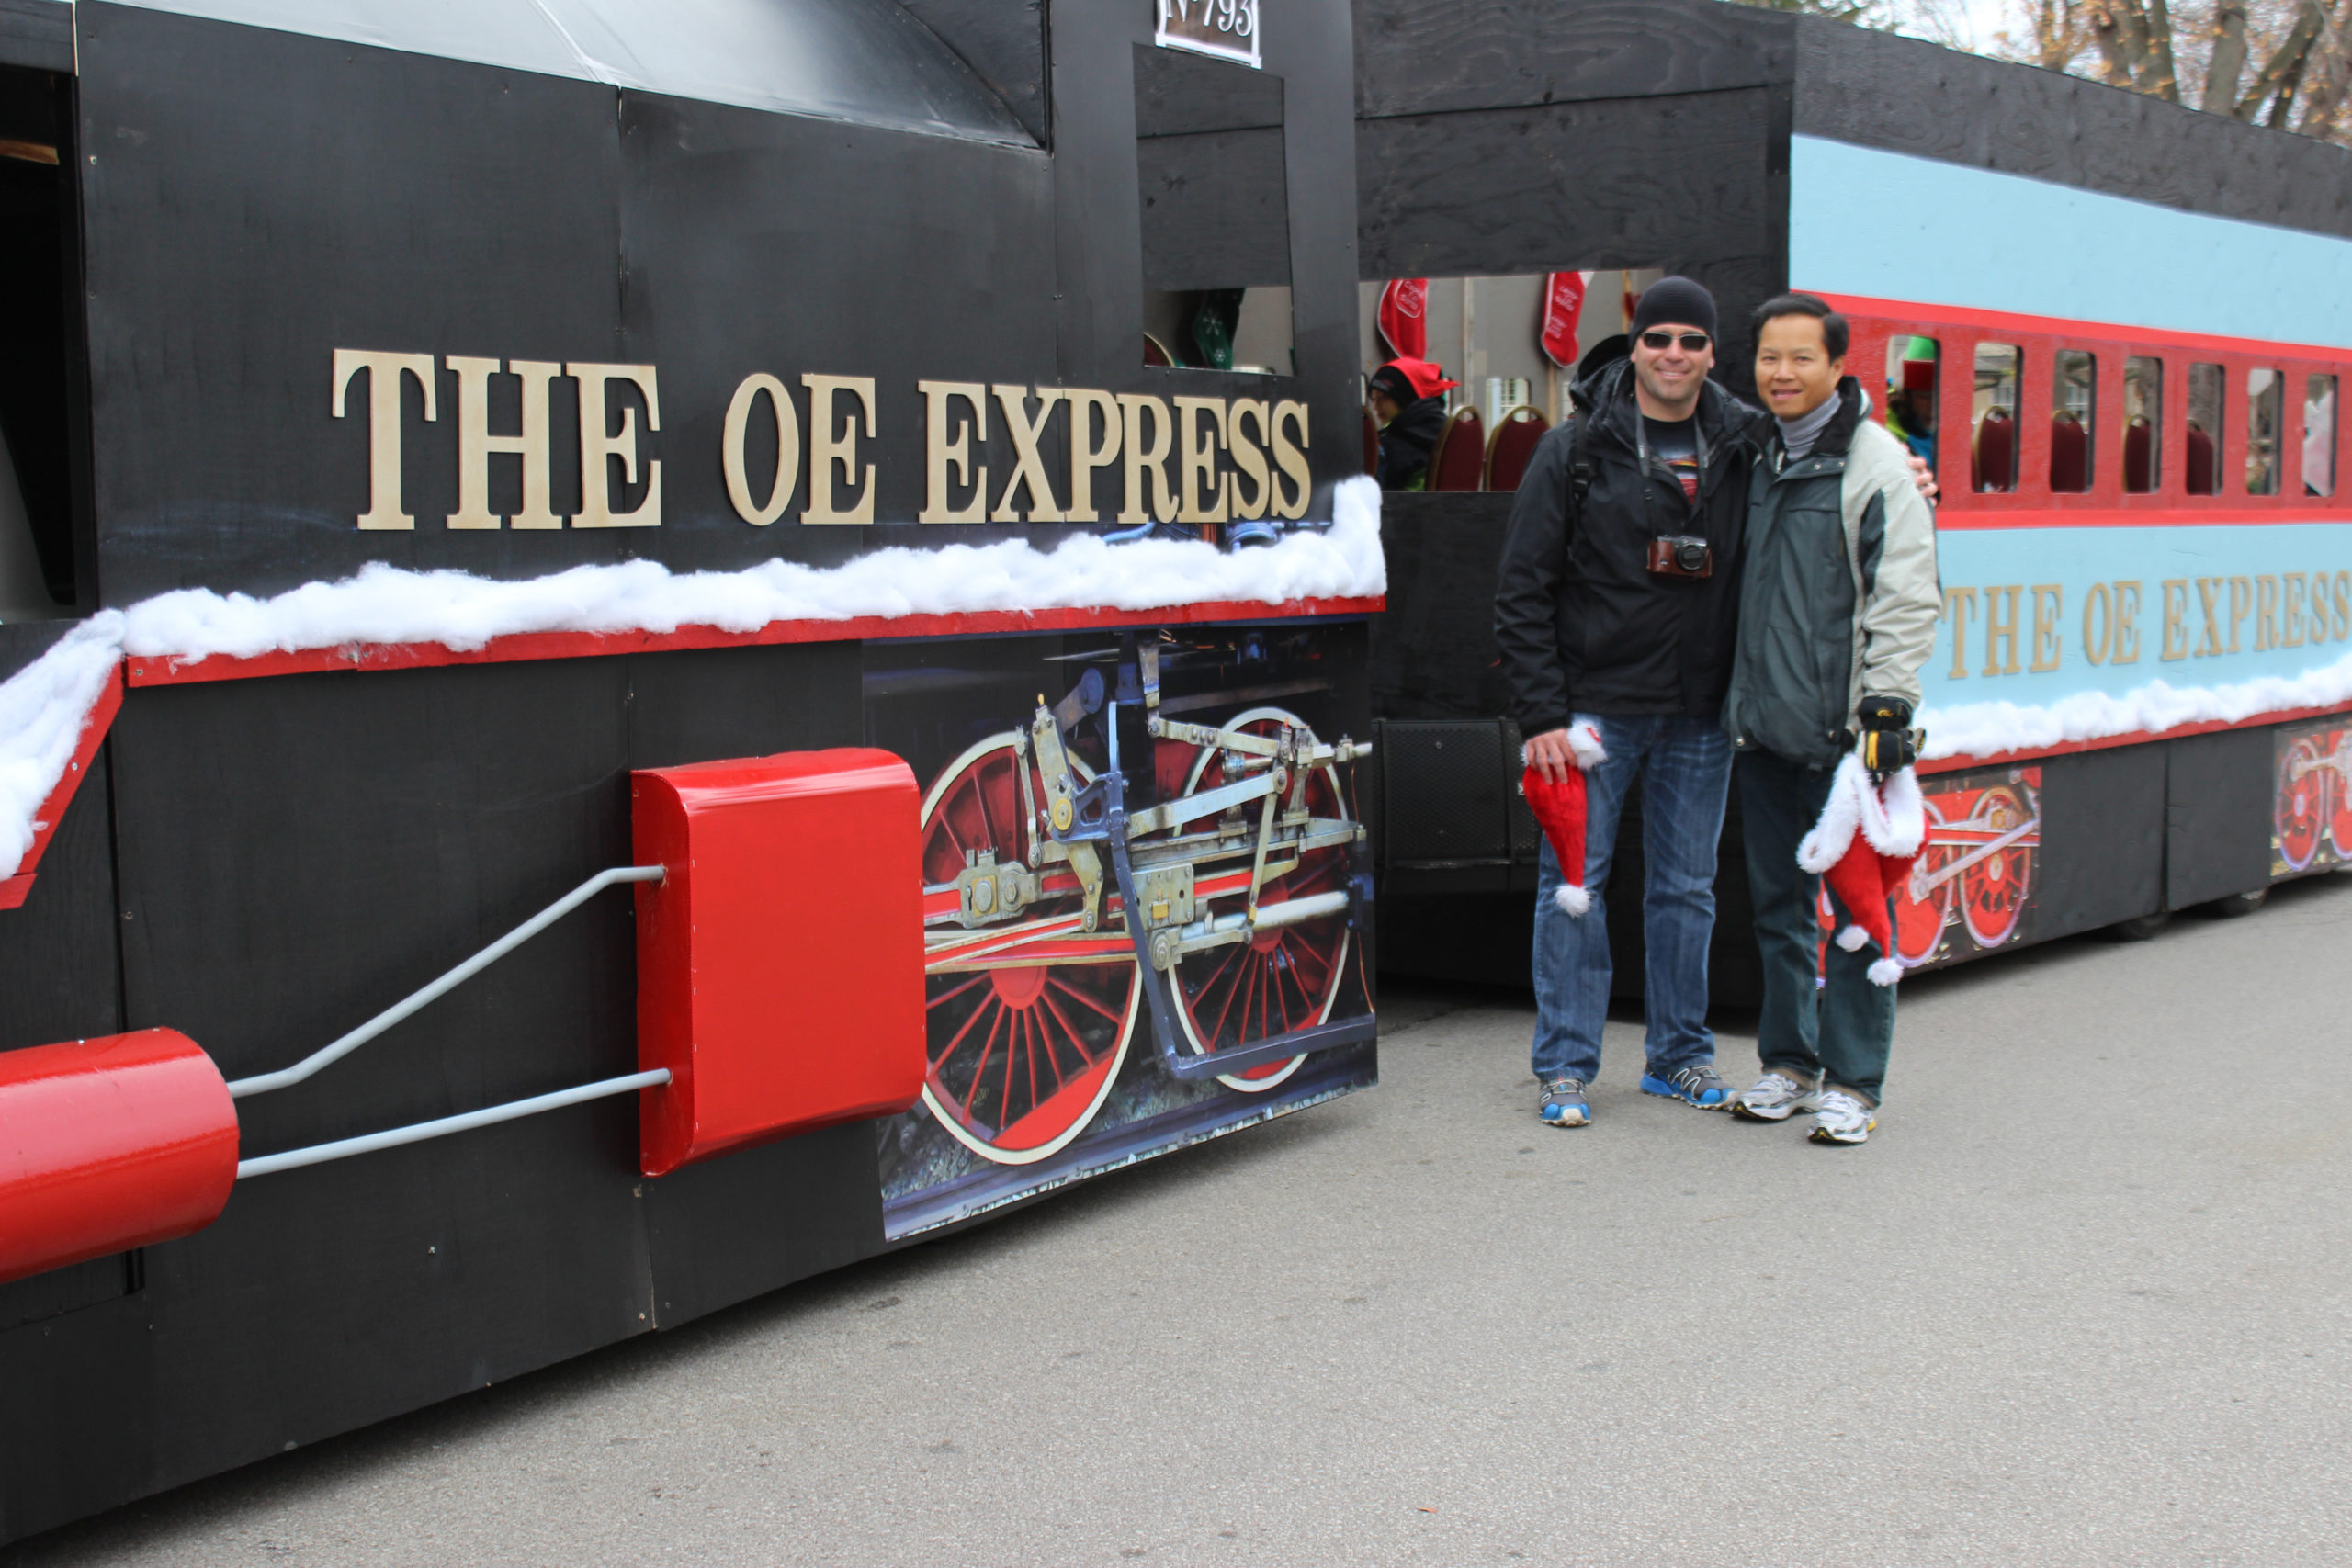 The OE Express won third place in the float competition.